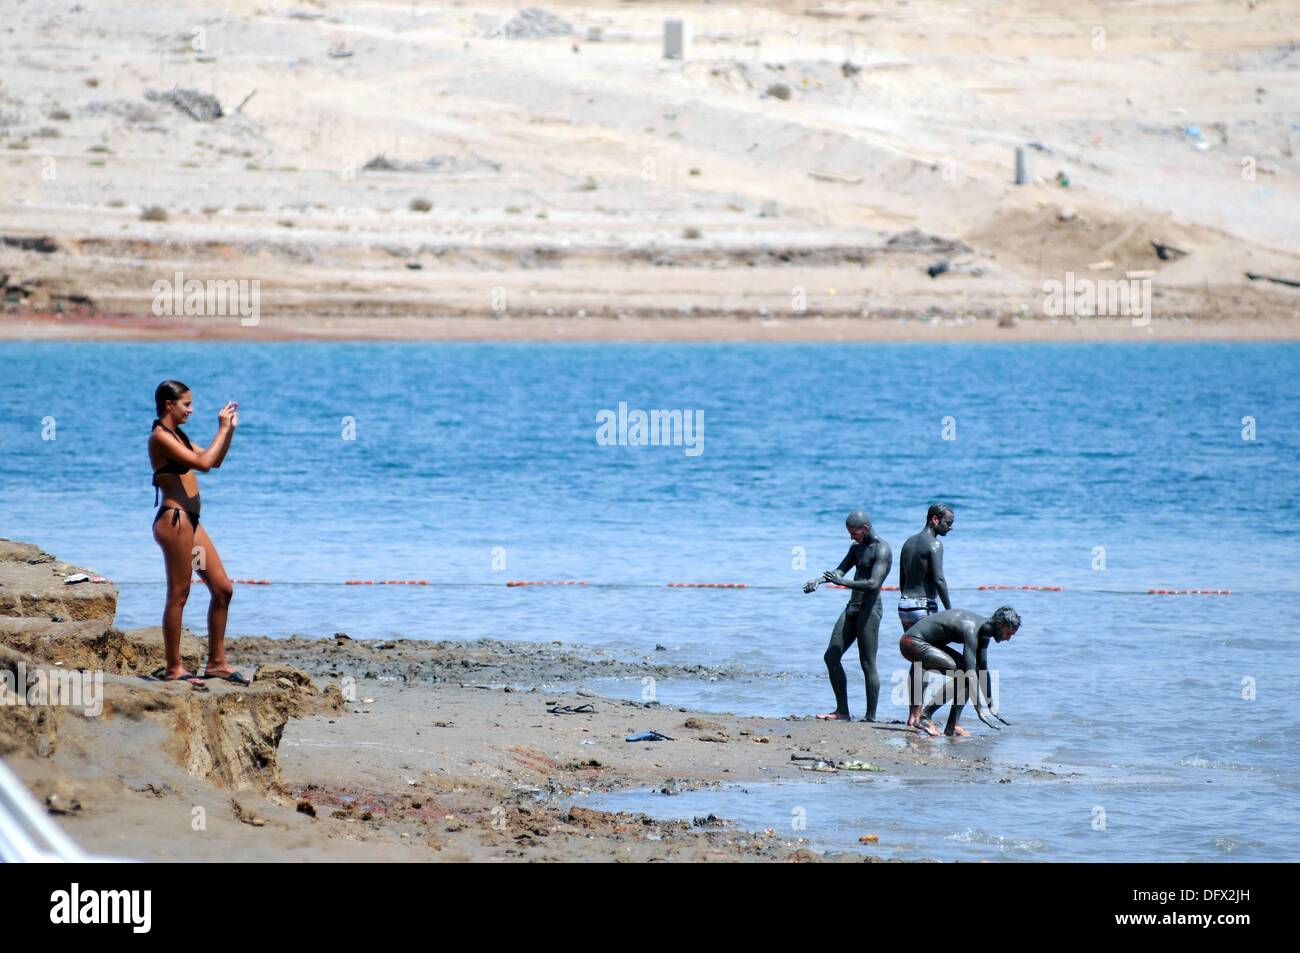 Three young men cover themselves in mud from the Dead Sea and a young woman takes pictures in Israel, 11 September 2013. The Dead Sea, bordering Israel and Jordan, is famous for its high salinity of about 30% (around ten times more than the Mediterranean Sea) that easily carries the human body. Its water source is the River Jordan and it does not have an outlet; healing powers for atopic dermatitis and psioriasis are attributed to its water and mud. This is reason, health tourism has developed at different places of the Dead Sea. The whole area of the Dead Sea lies 416 meters below sea level. Stock Photo